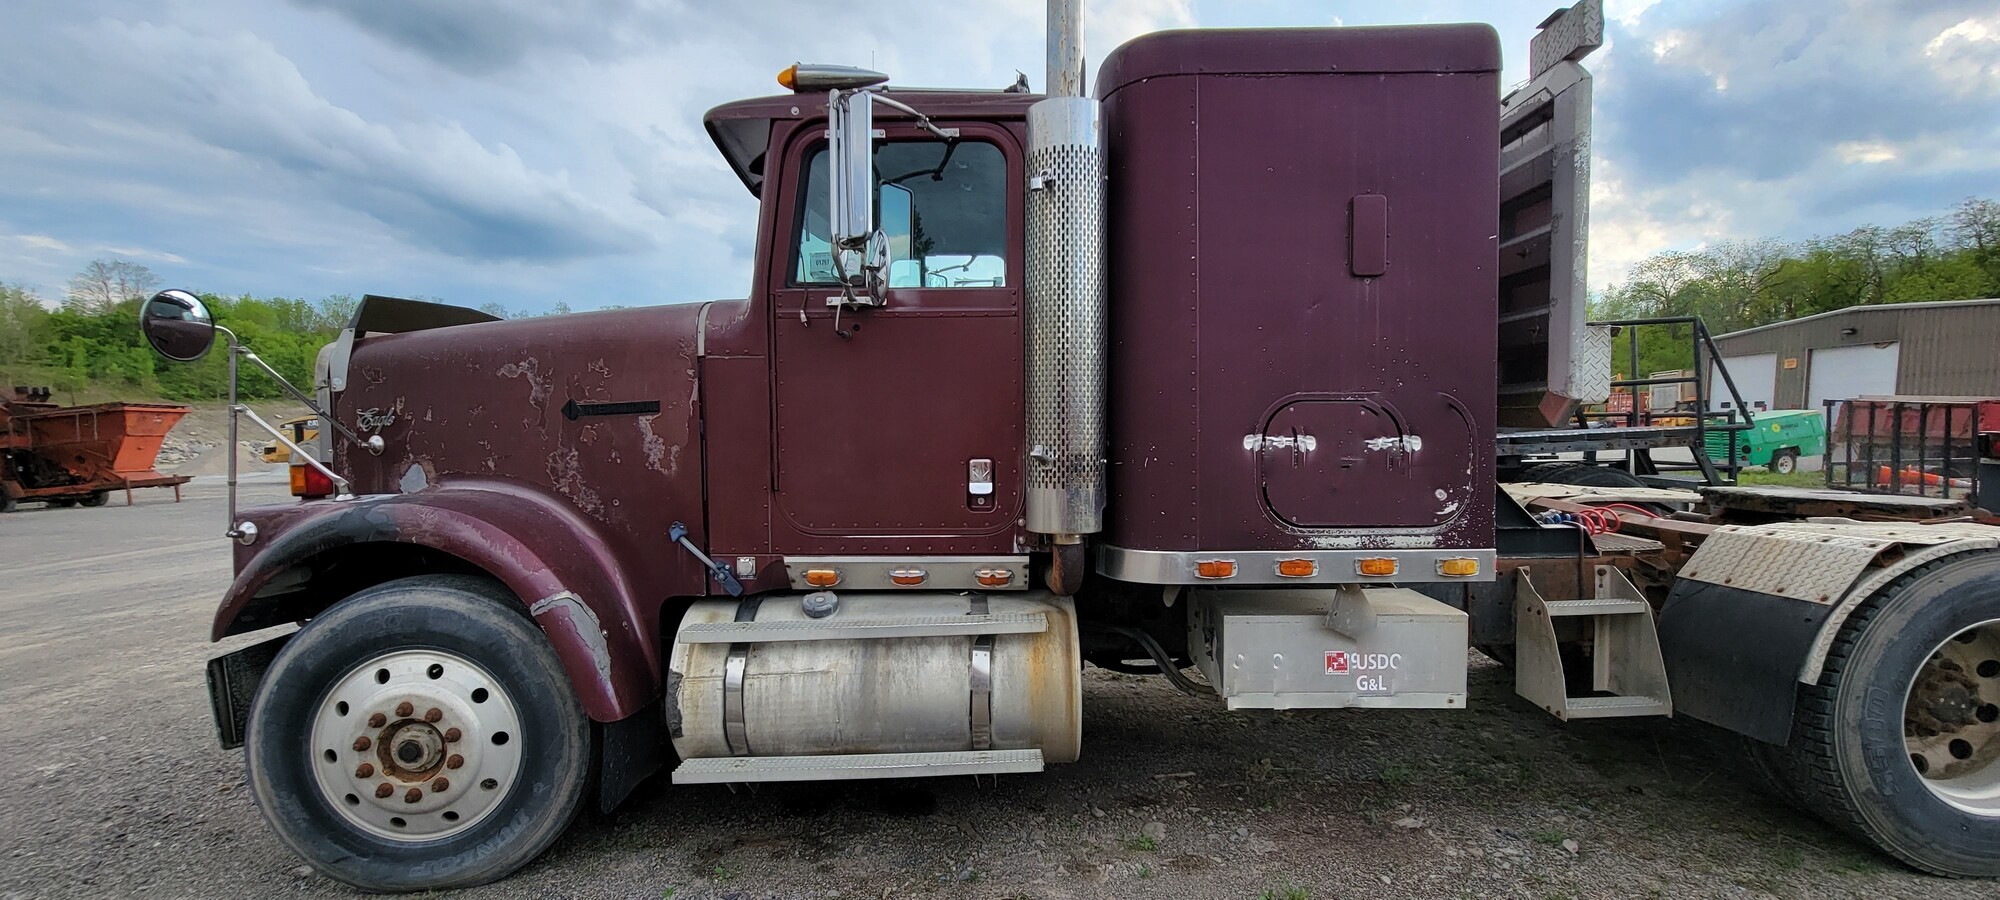 1994 INTERNATIONAL 9300 HEAVY DUTY TRUCK WITH CONVENTIONAL SLEEPER | Iron Listing